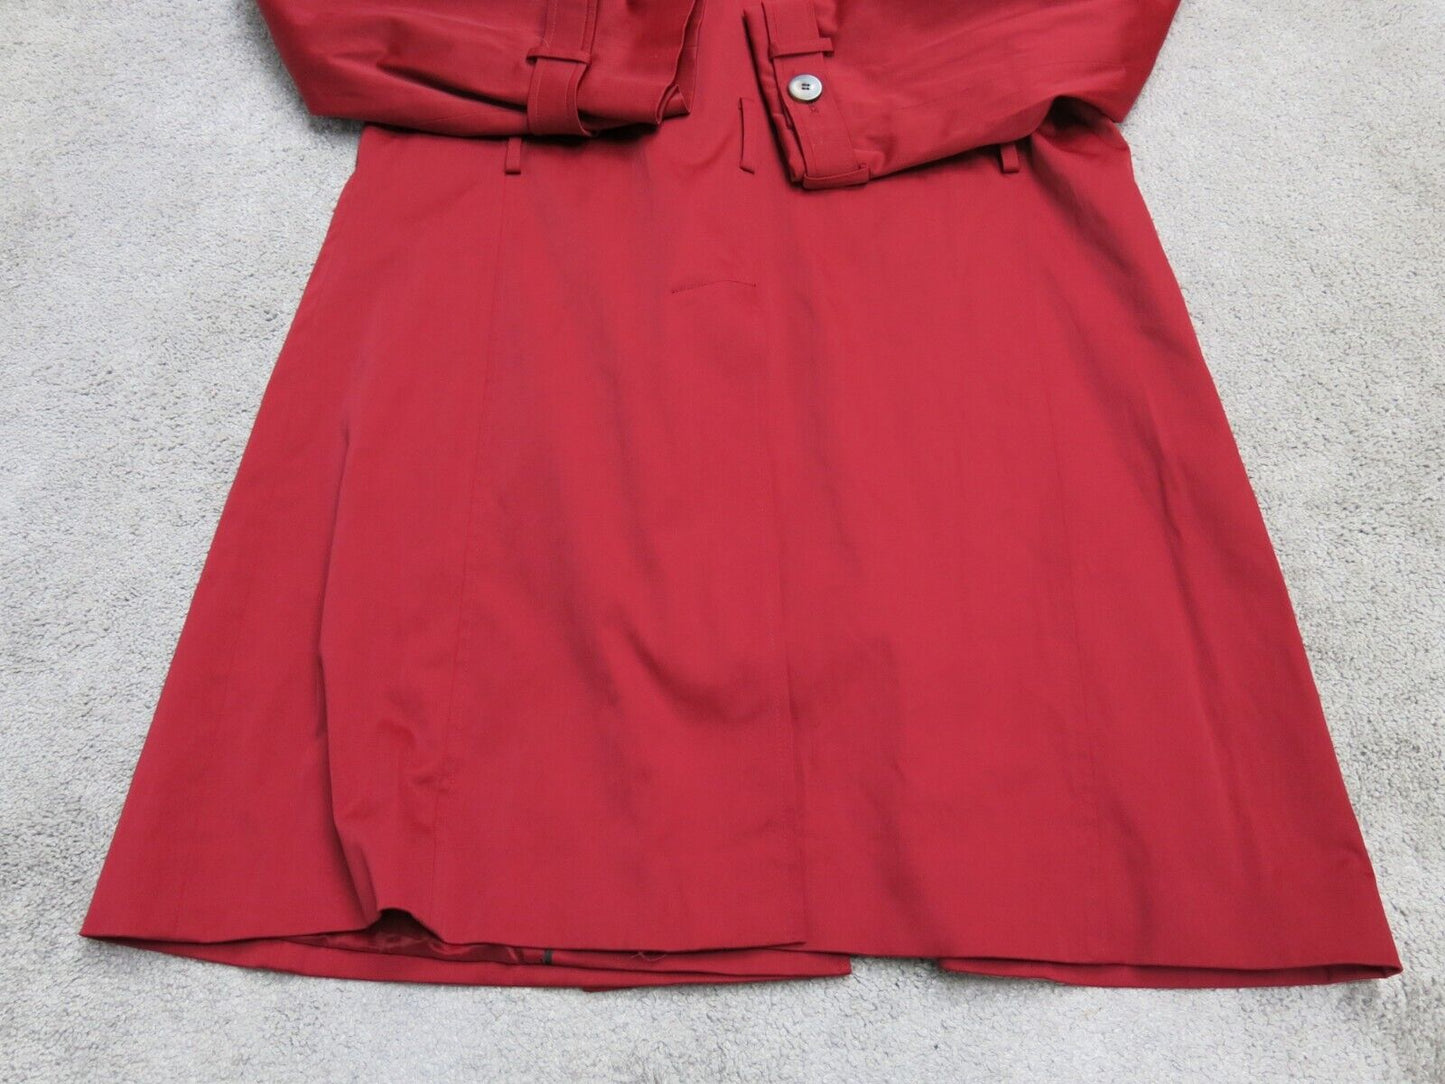 Talbots Mens Trench Coat Jacket Front Button Long Sleeves Pockets Red Size 16